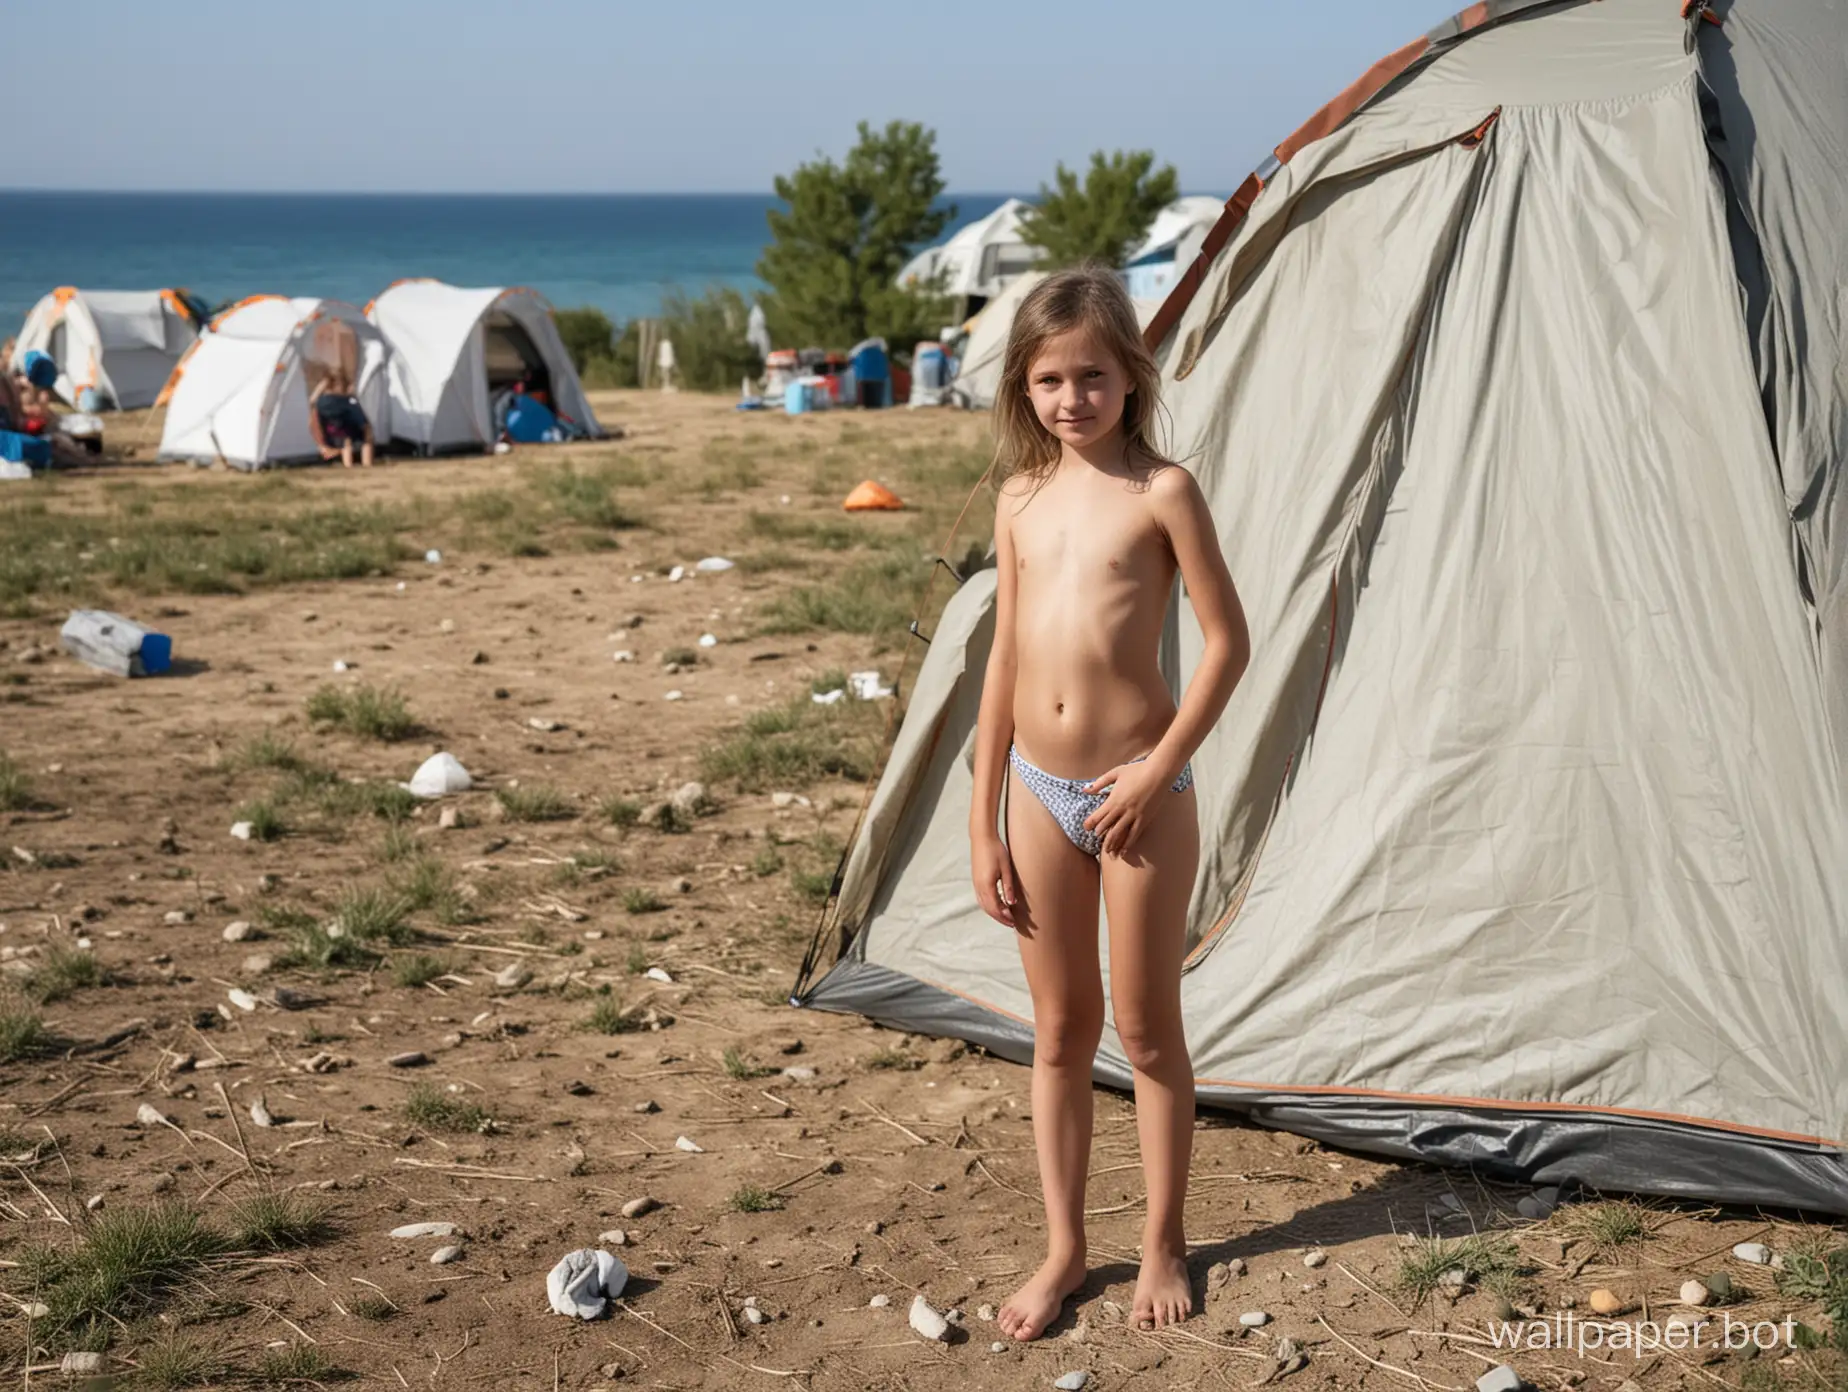 A 10-year-old girl at a camping tent, Crimea, topless, full-length, people in the distance